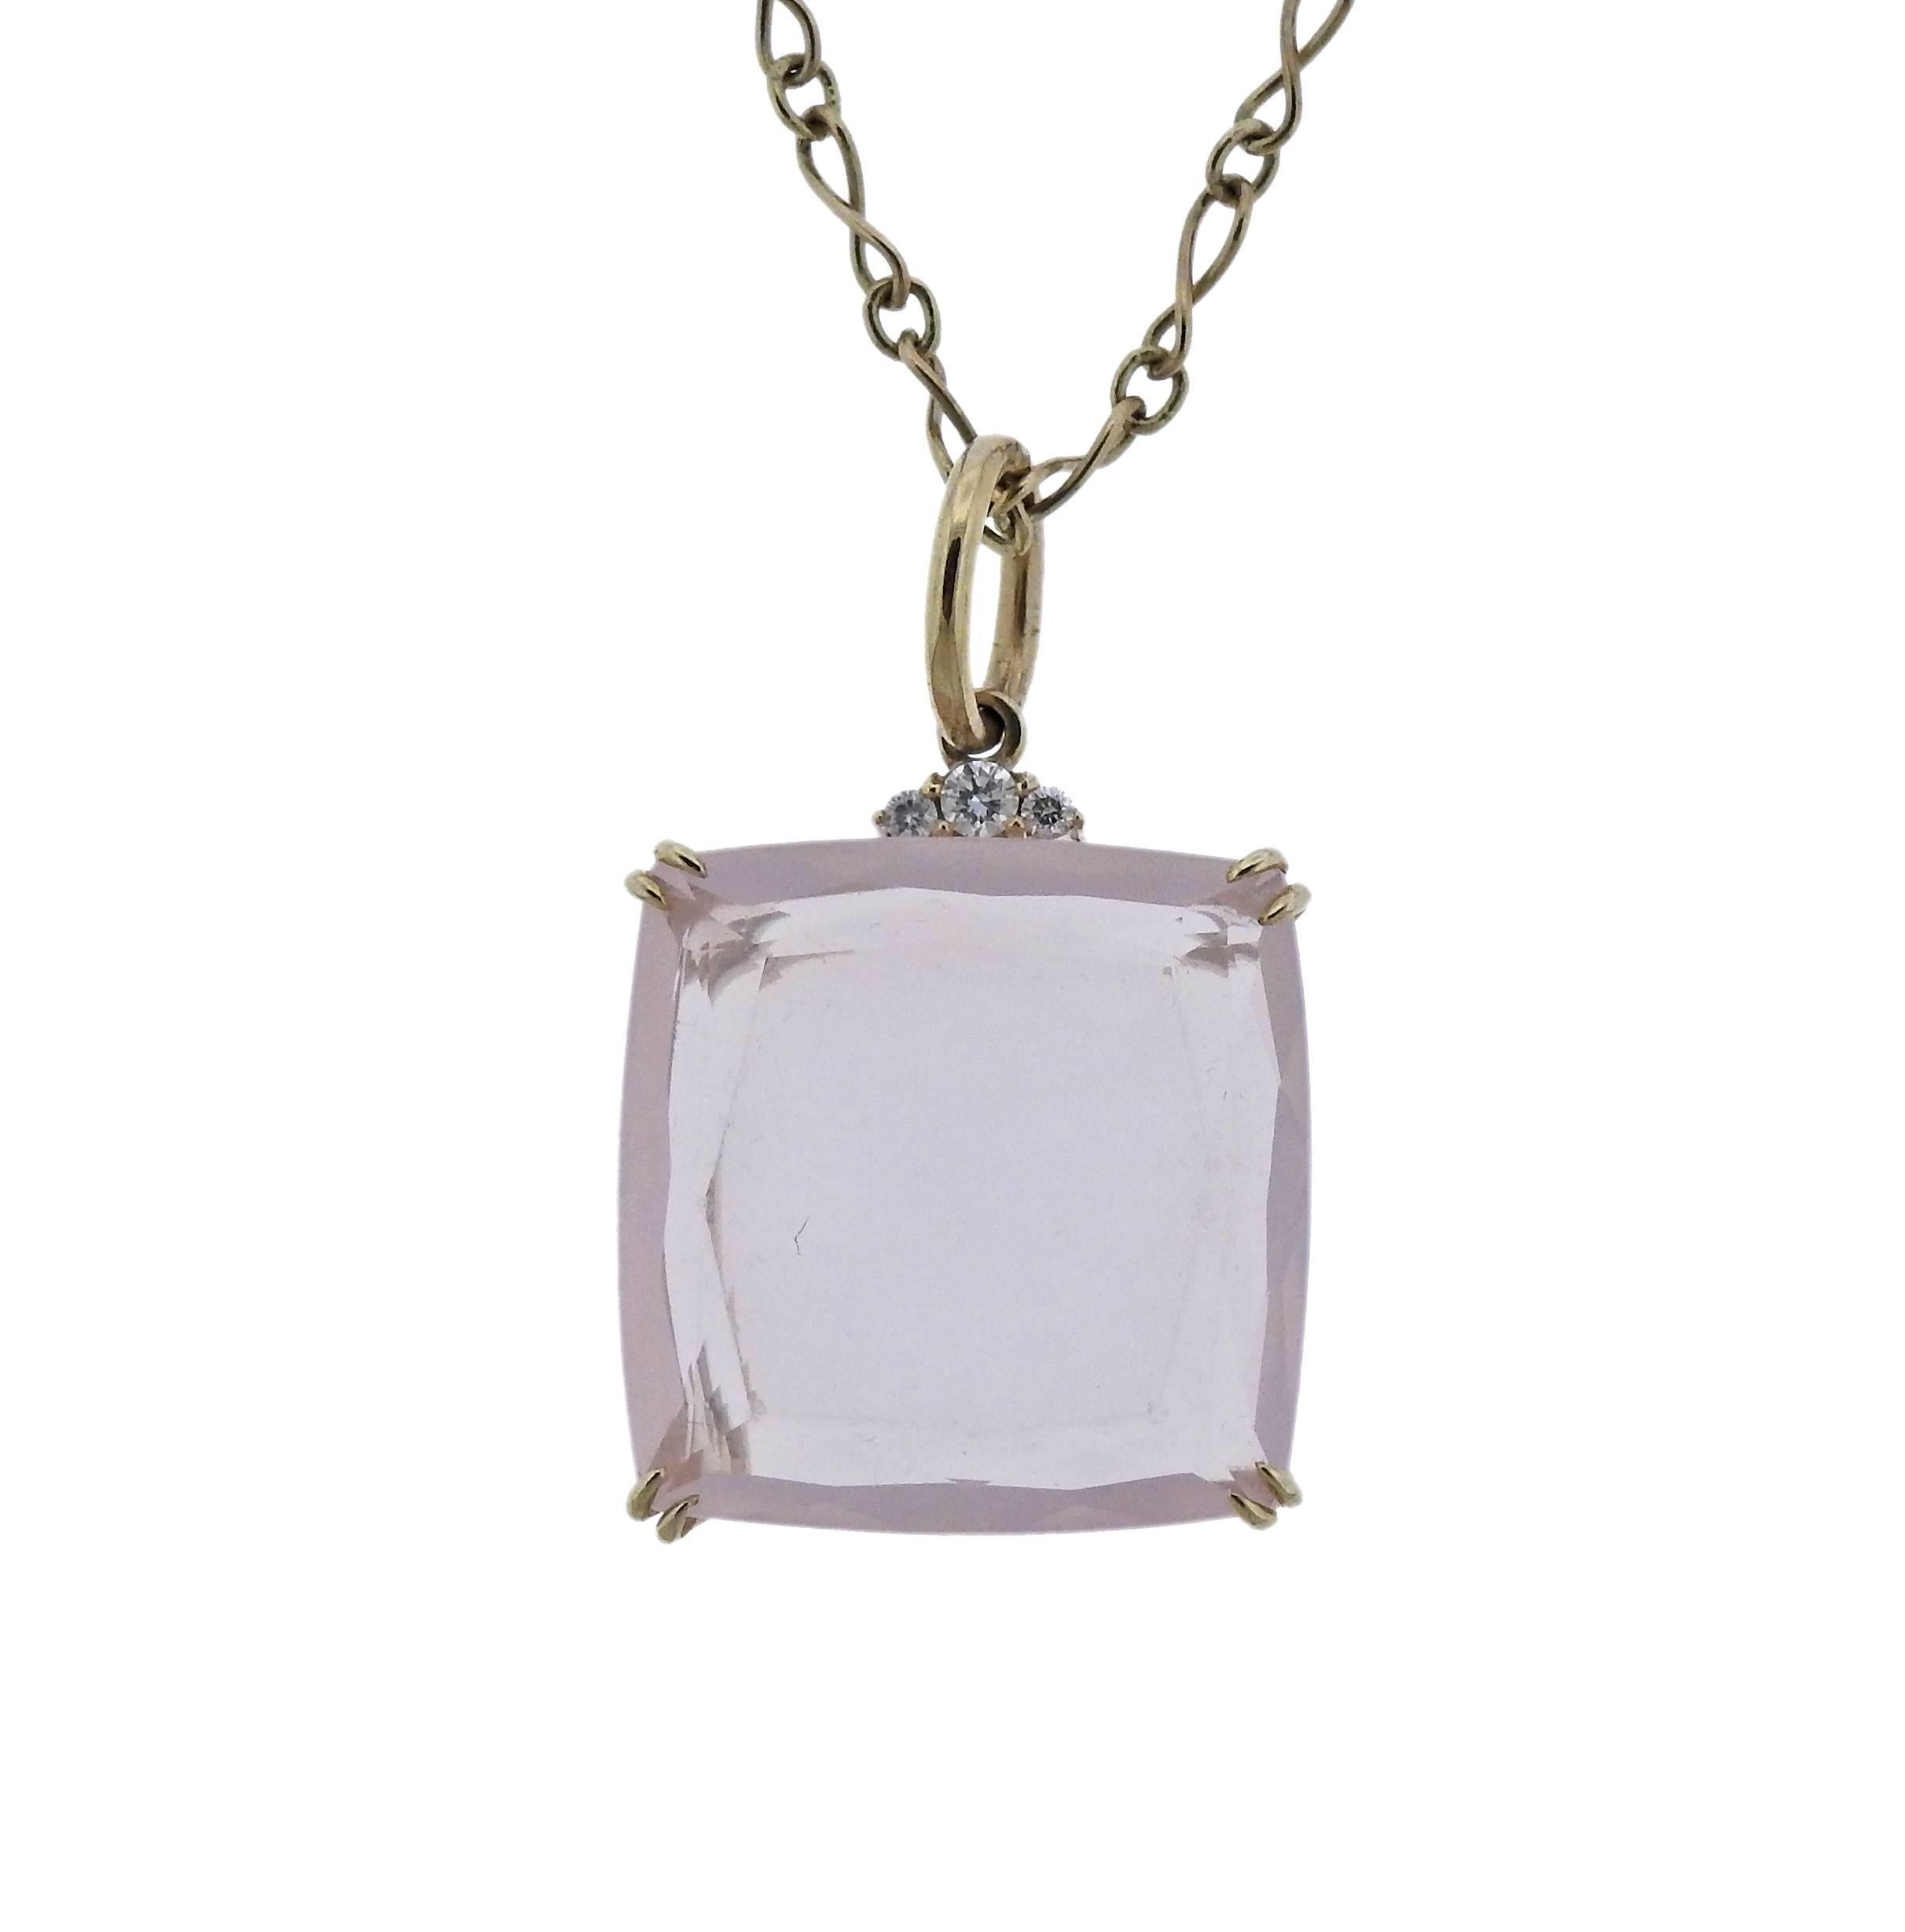 18k yellow gold necklace, crafted by H. Stern , featuring Cobblestone rose quartz and diamond pendant. Necklace is 17 3/4" long, Pendant - 37mm x 23mm, weighs 16.5 grams. Marked:750, S and Star marks. 